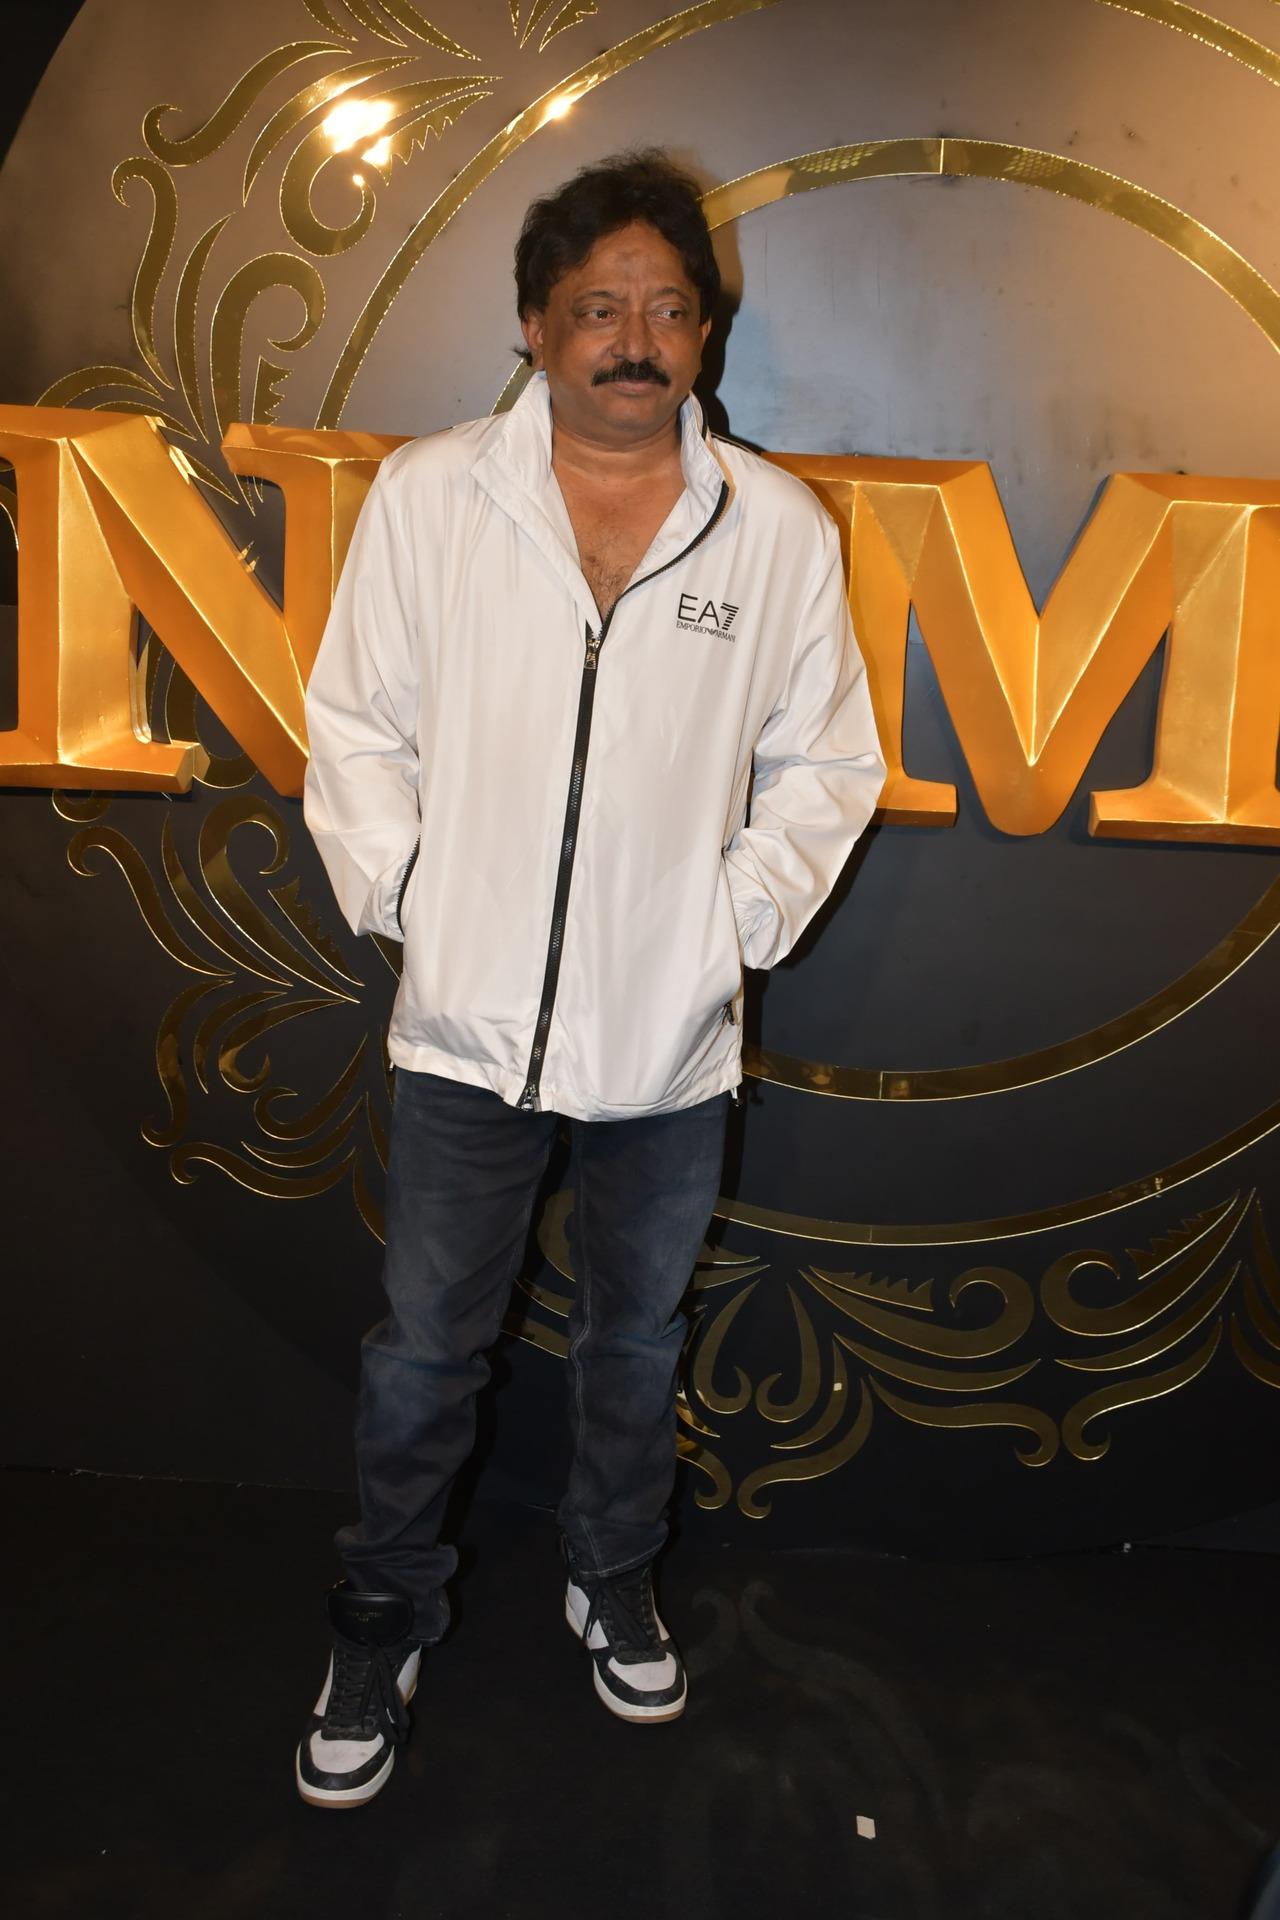 Filmmaker Ram Gopal Varma who had hailed the film on social media was also among the guests at the party